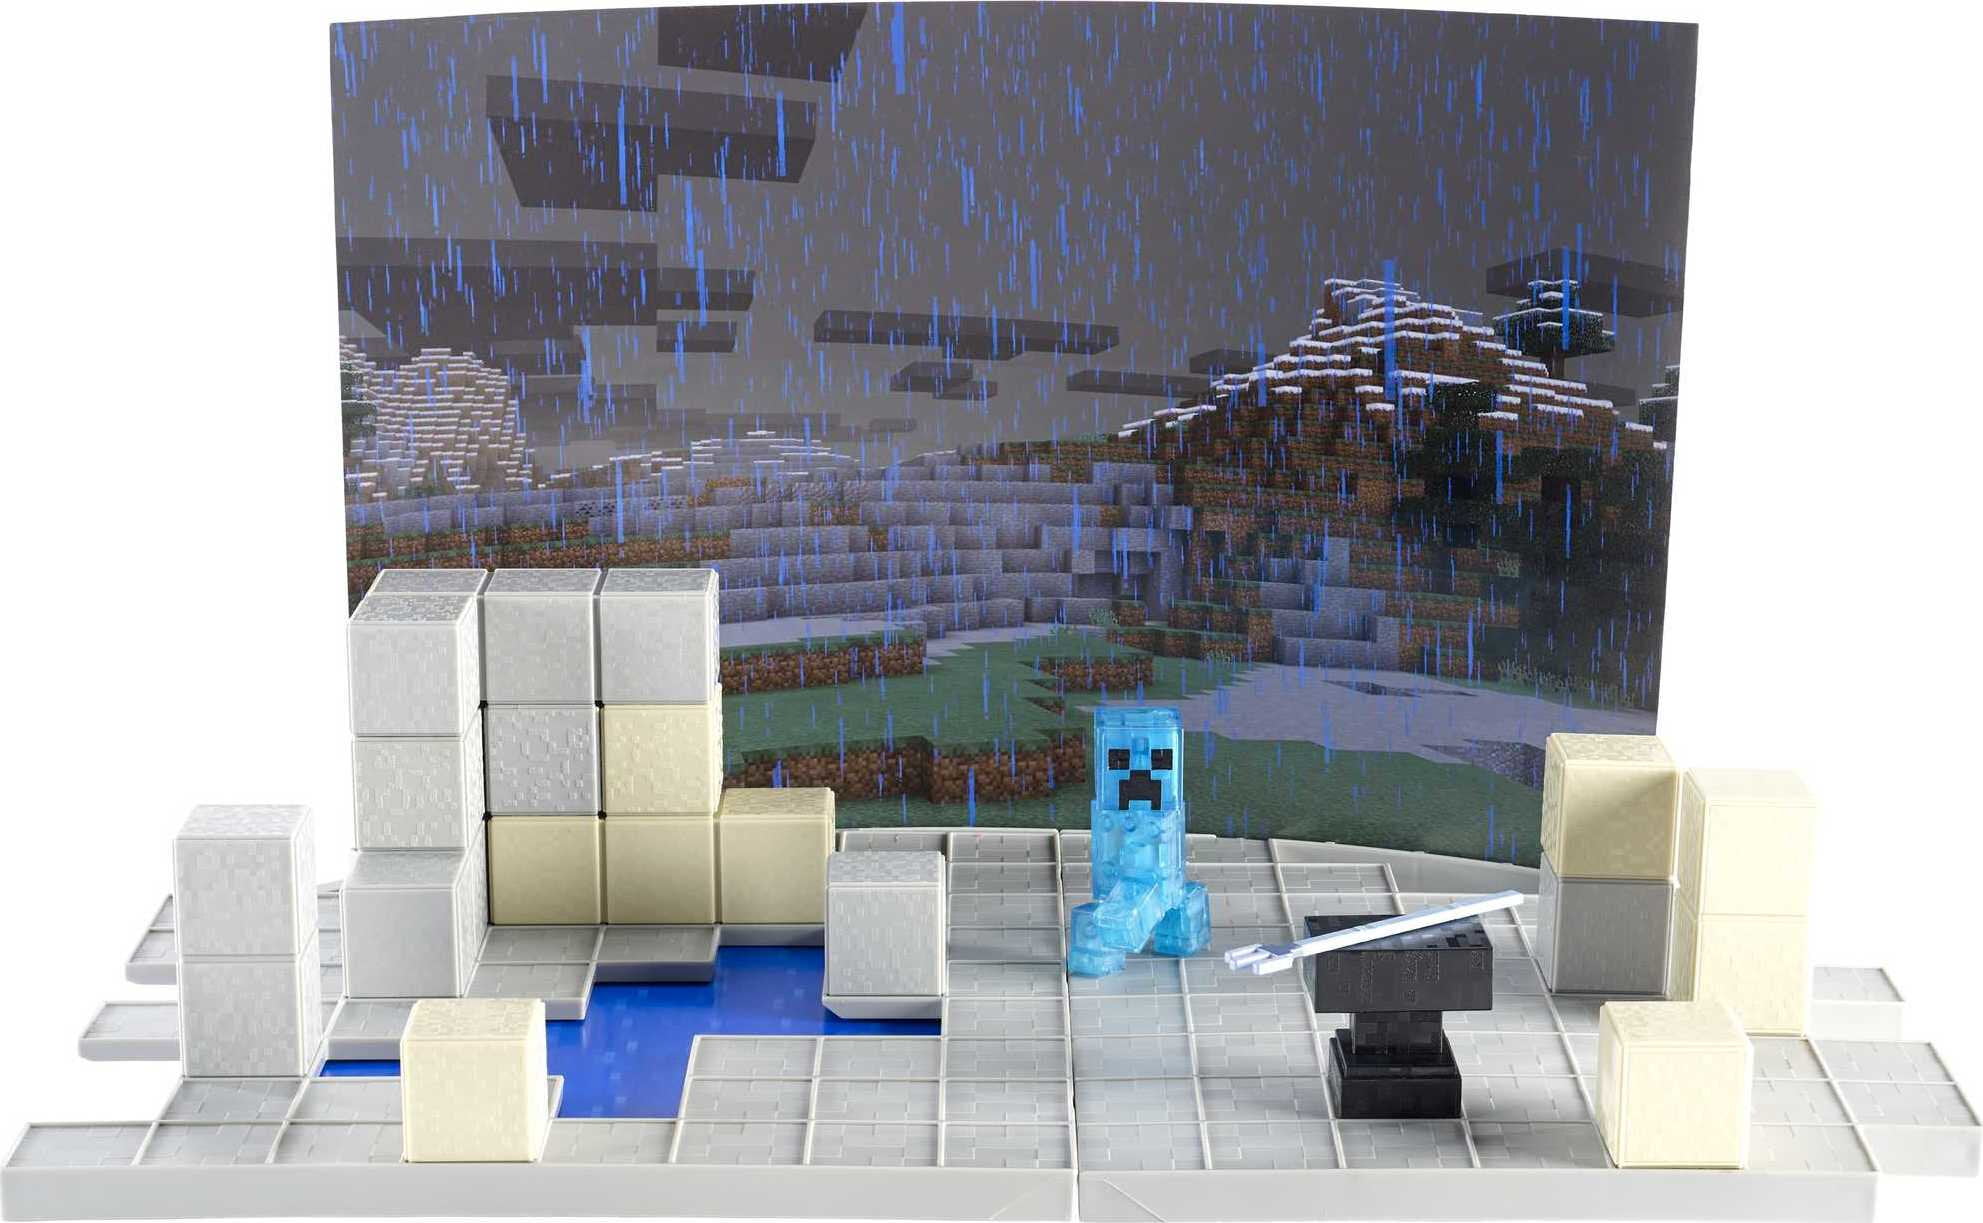  Minecraft Comic Maker Biome Set Comic Book Creator Toy with  Environment Accessories and Creeper Figure, Works with Free App and Based  on Minecraft Video Game, Toys for Boys and Girls Age